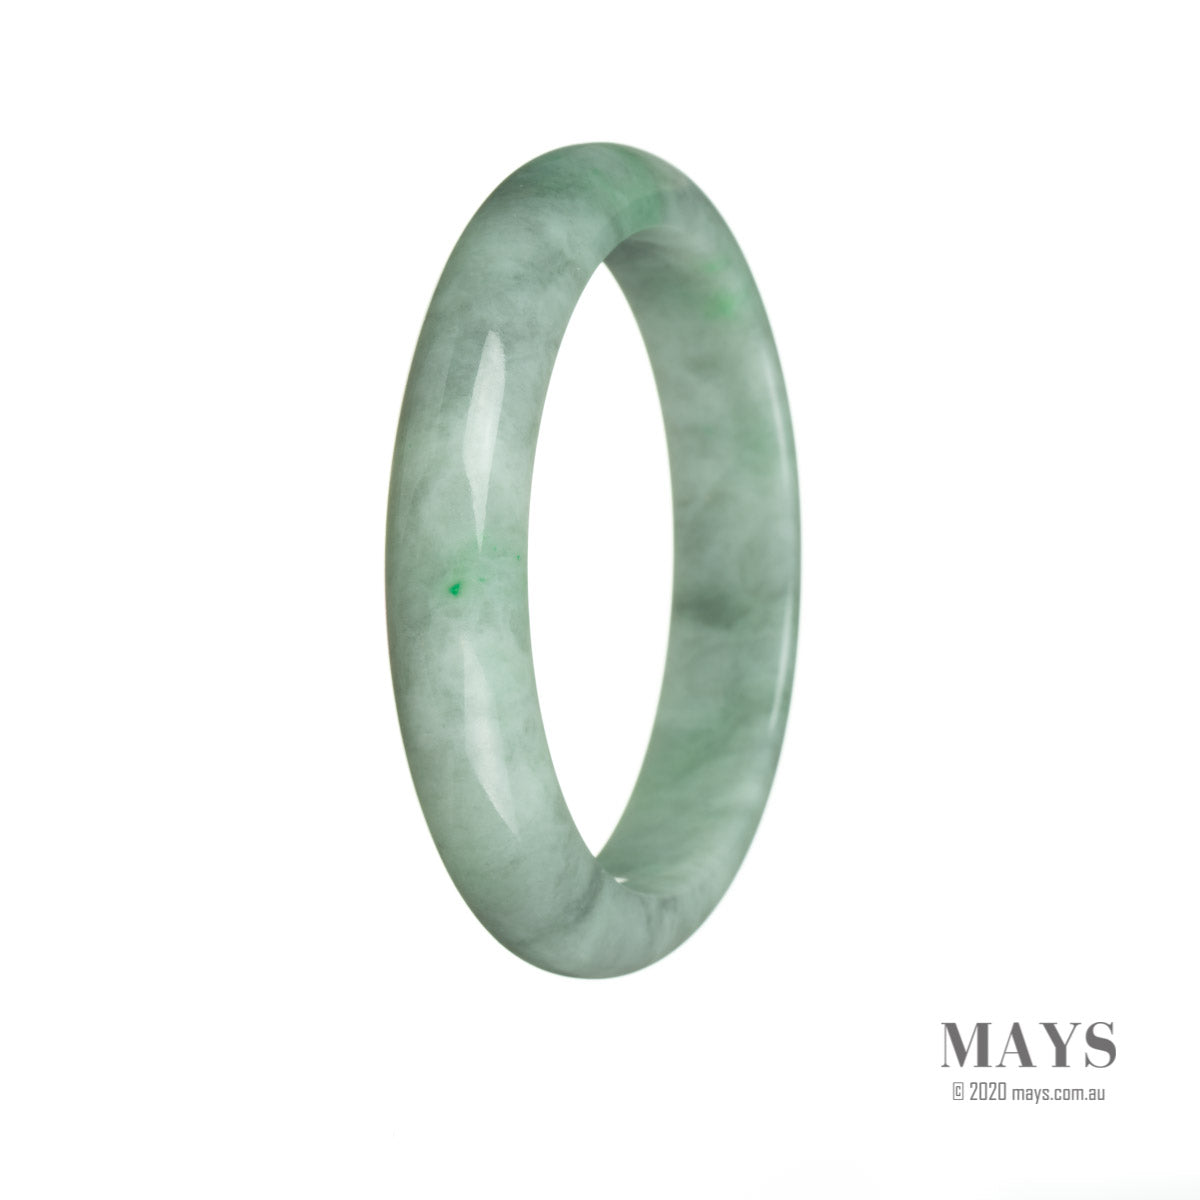 A close-up image of a genuine untreated green Burma jade bangle. The bangle is 59mm in size and has a semi-round shape. It is being offered by MAYS GEMS.